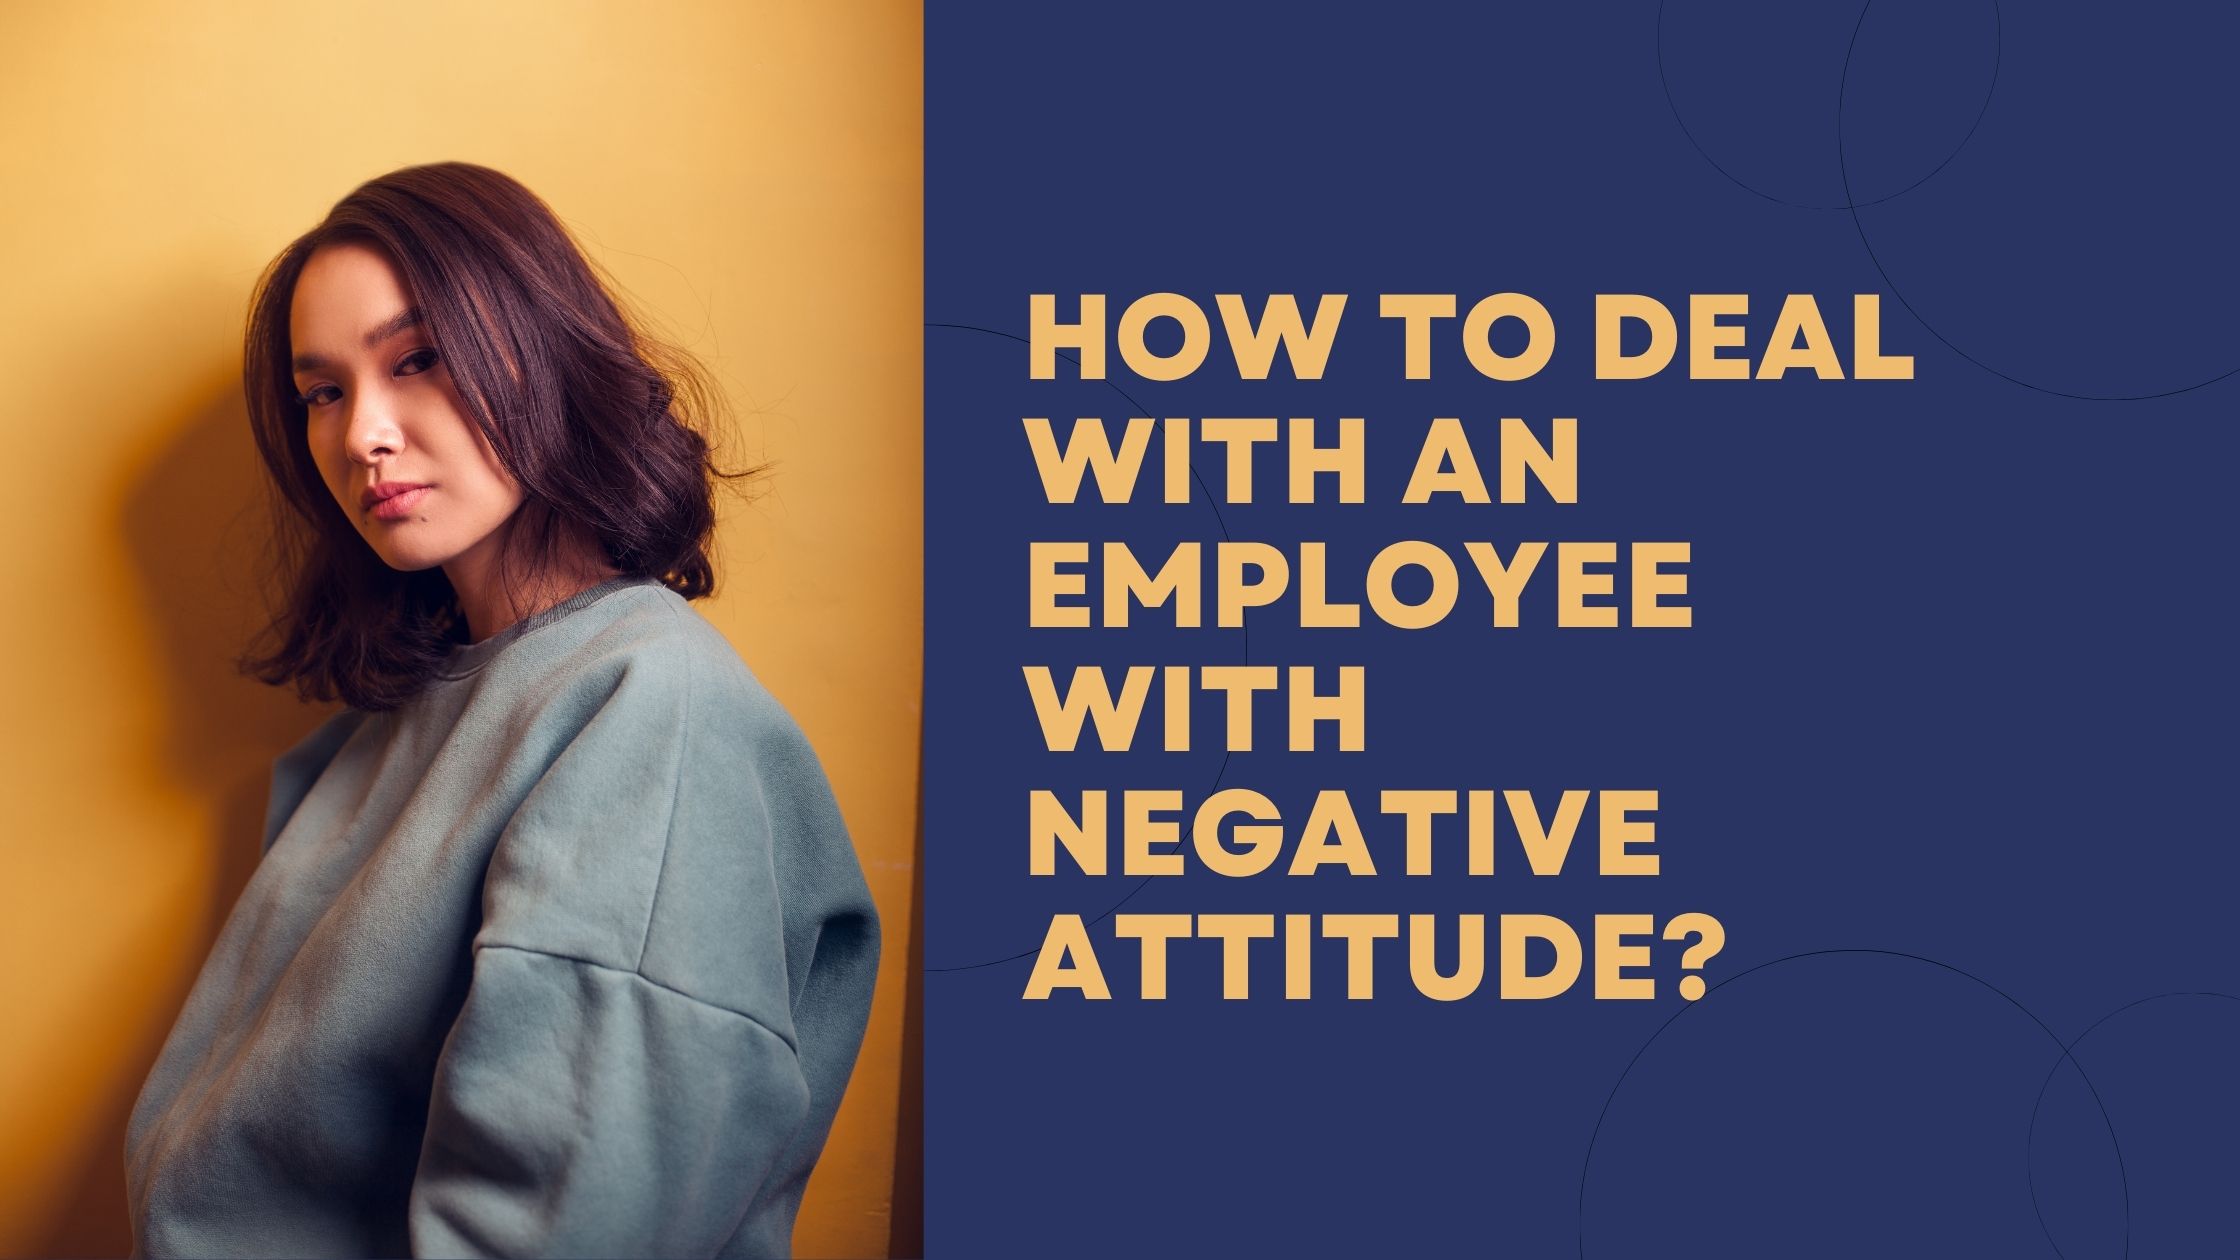 How to deal with an employee with negative/toxic attitude?